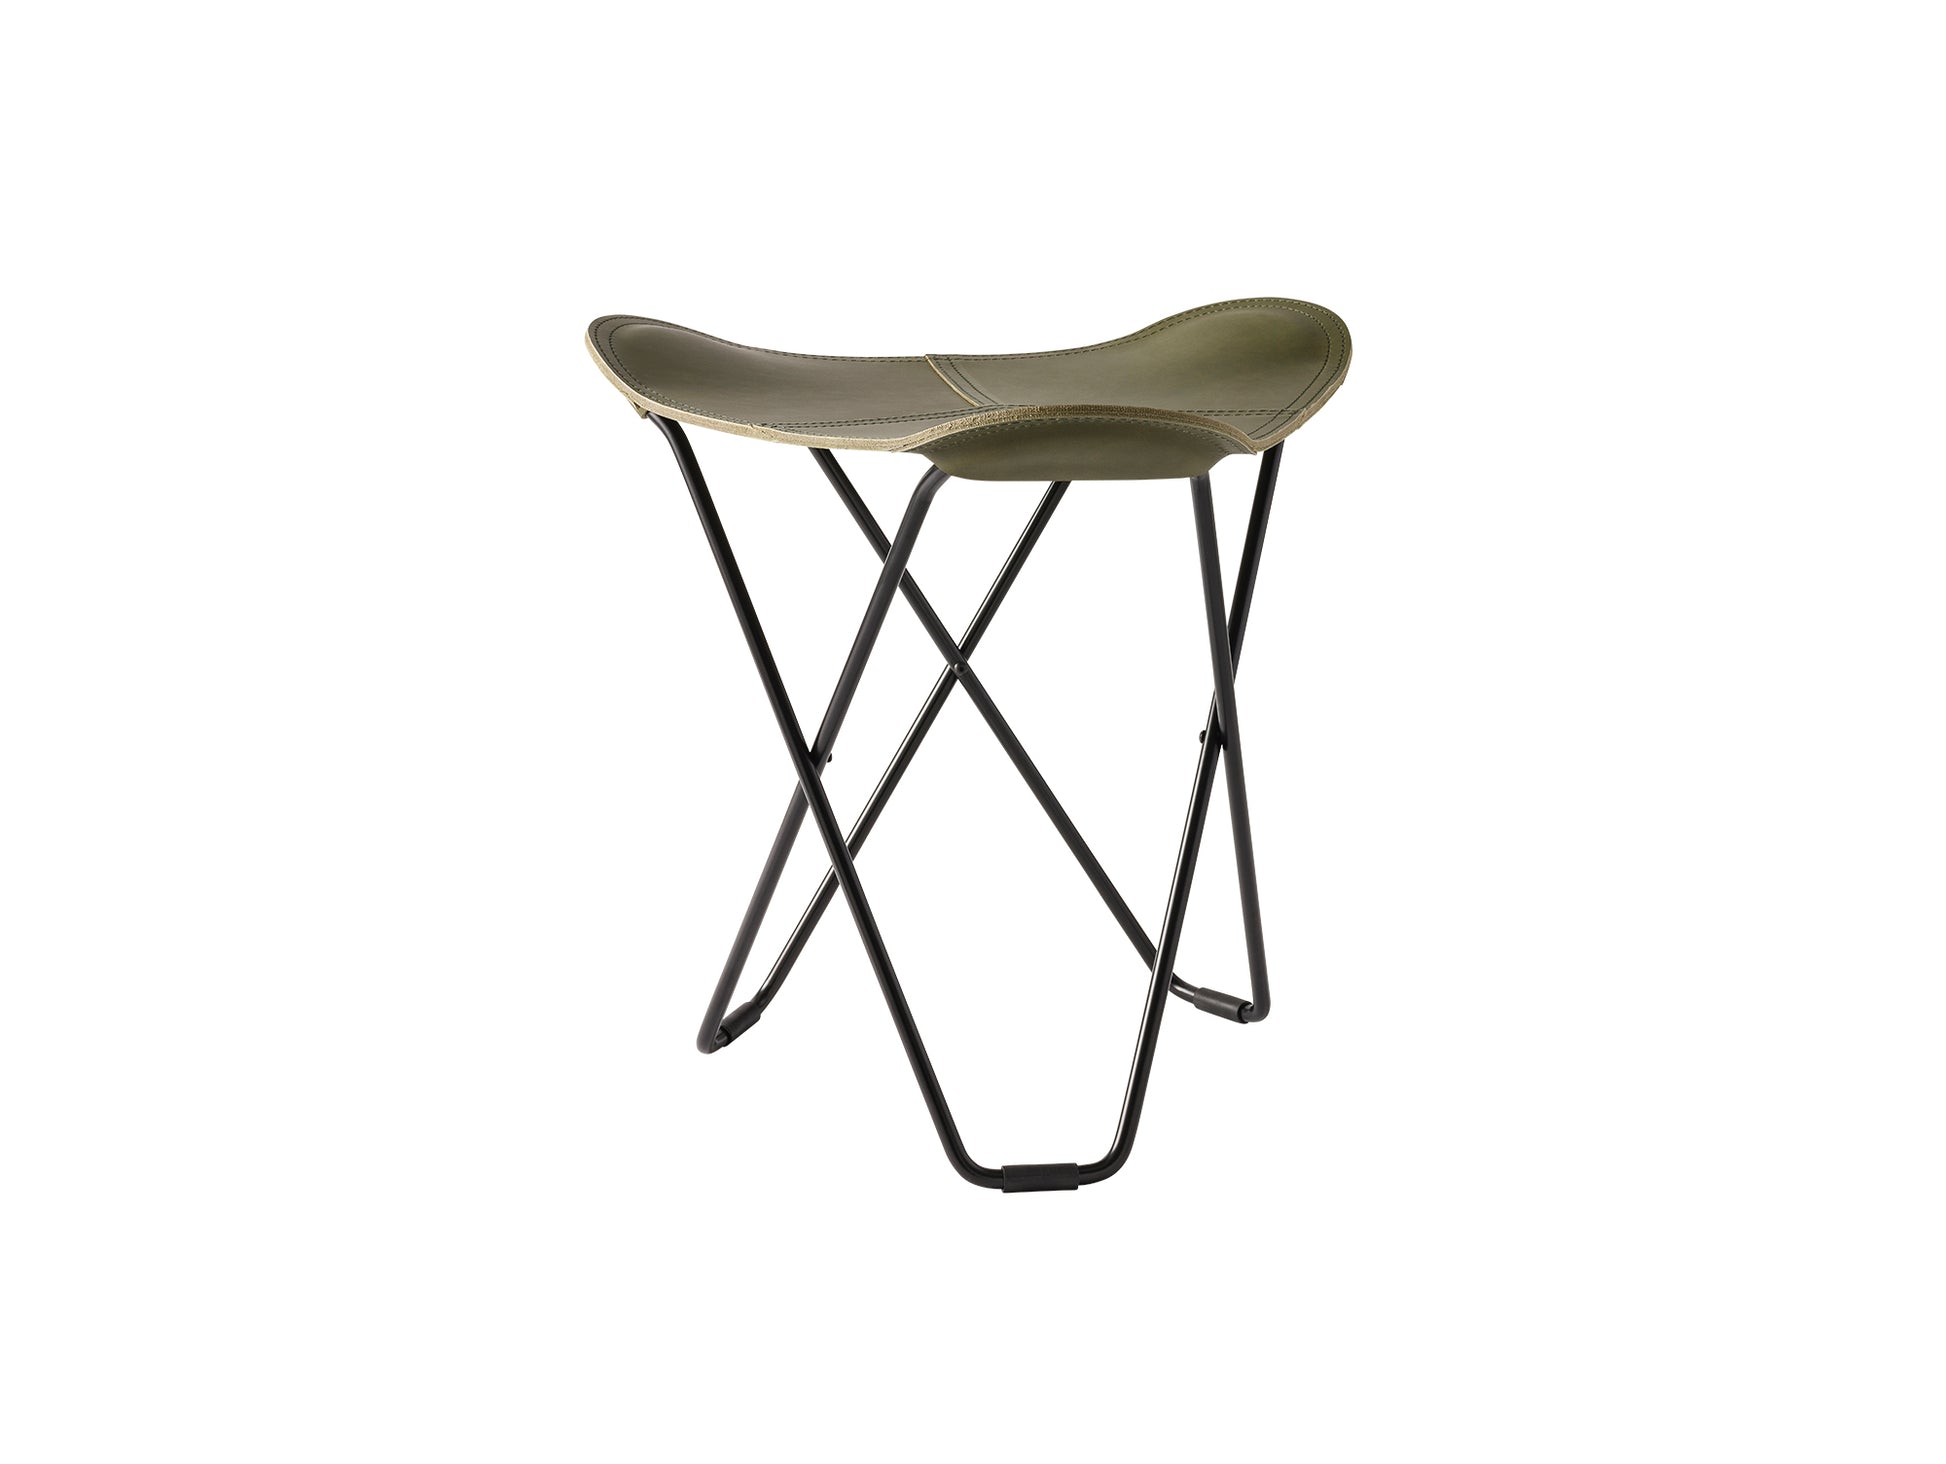 Pampa Flying Goose Stool by Cuero - Black Frame / Grass Green Leather